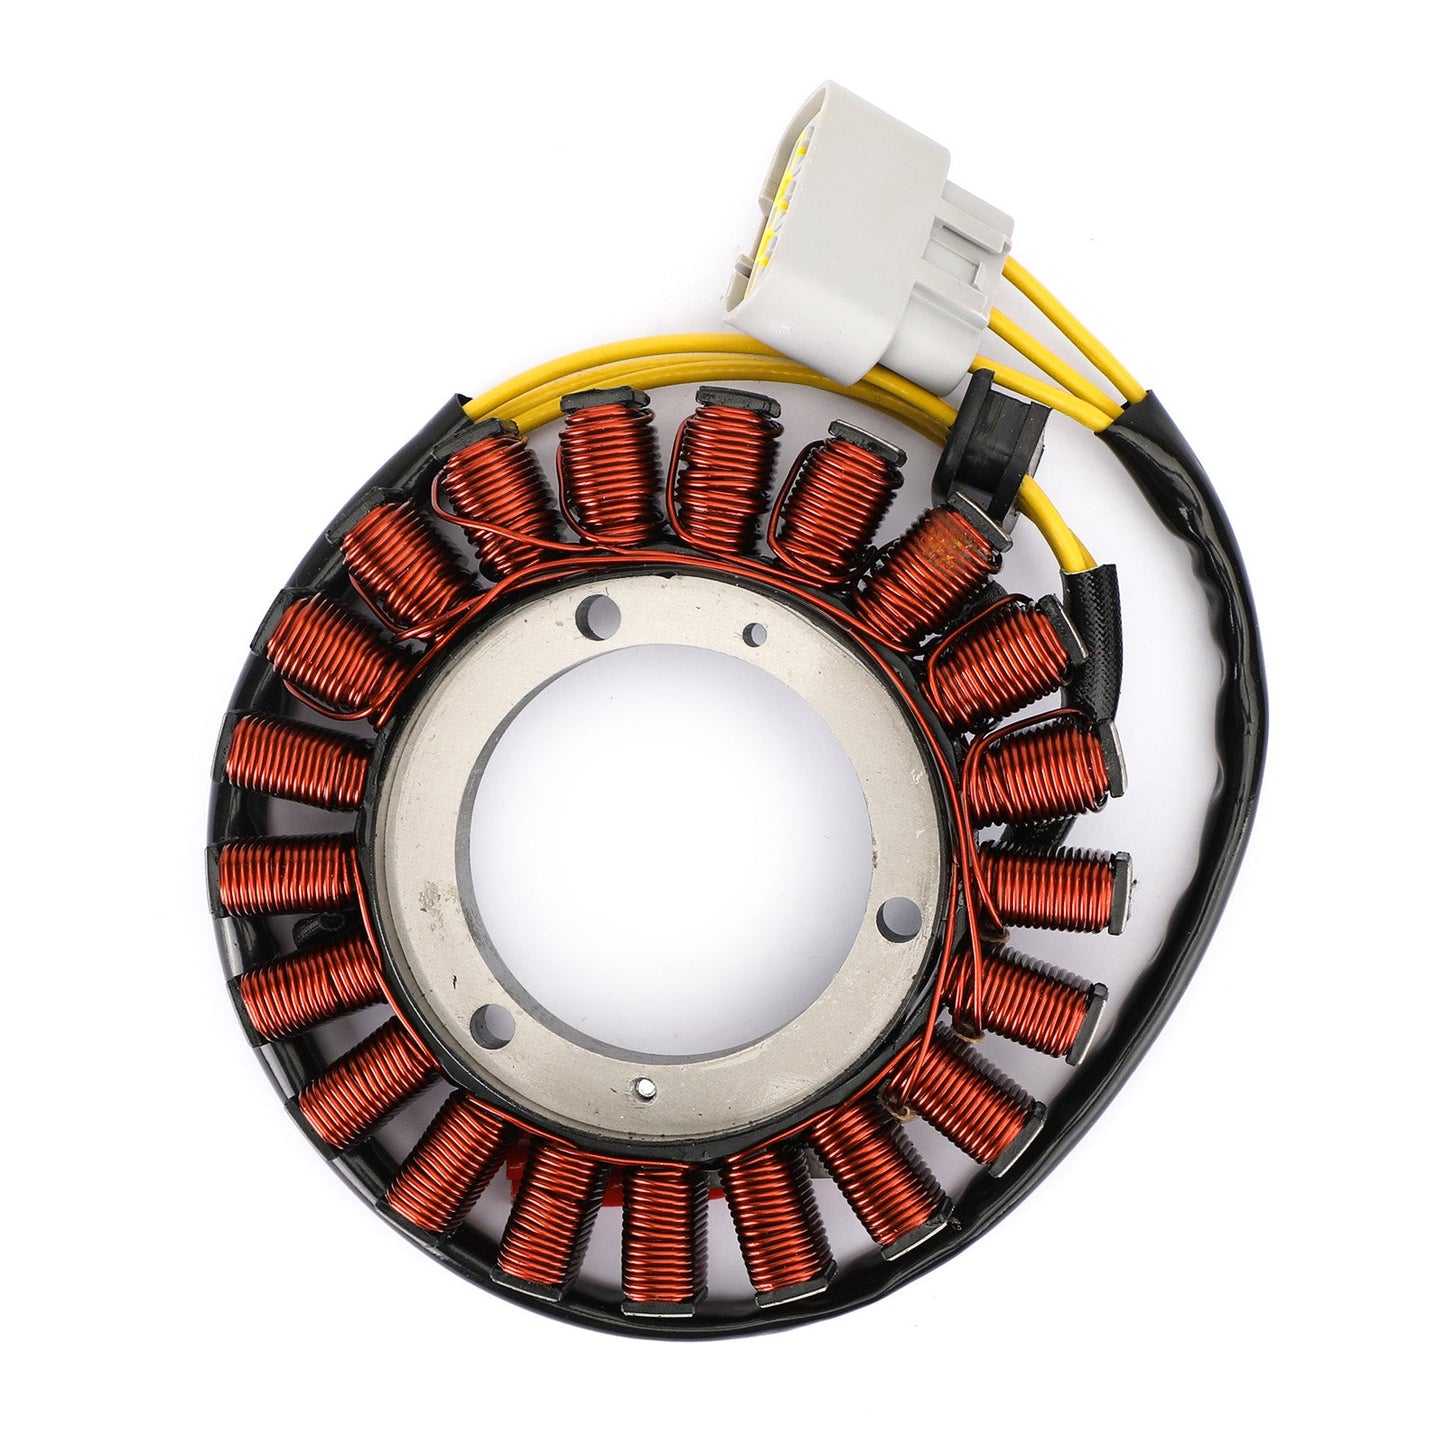 Stator Generator Fit For BMW R1200GS R1250GS ADV R 1200 1250 R/RS/RT